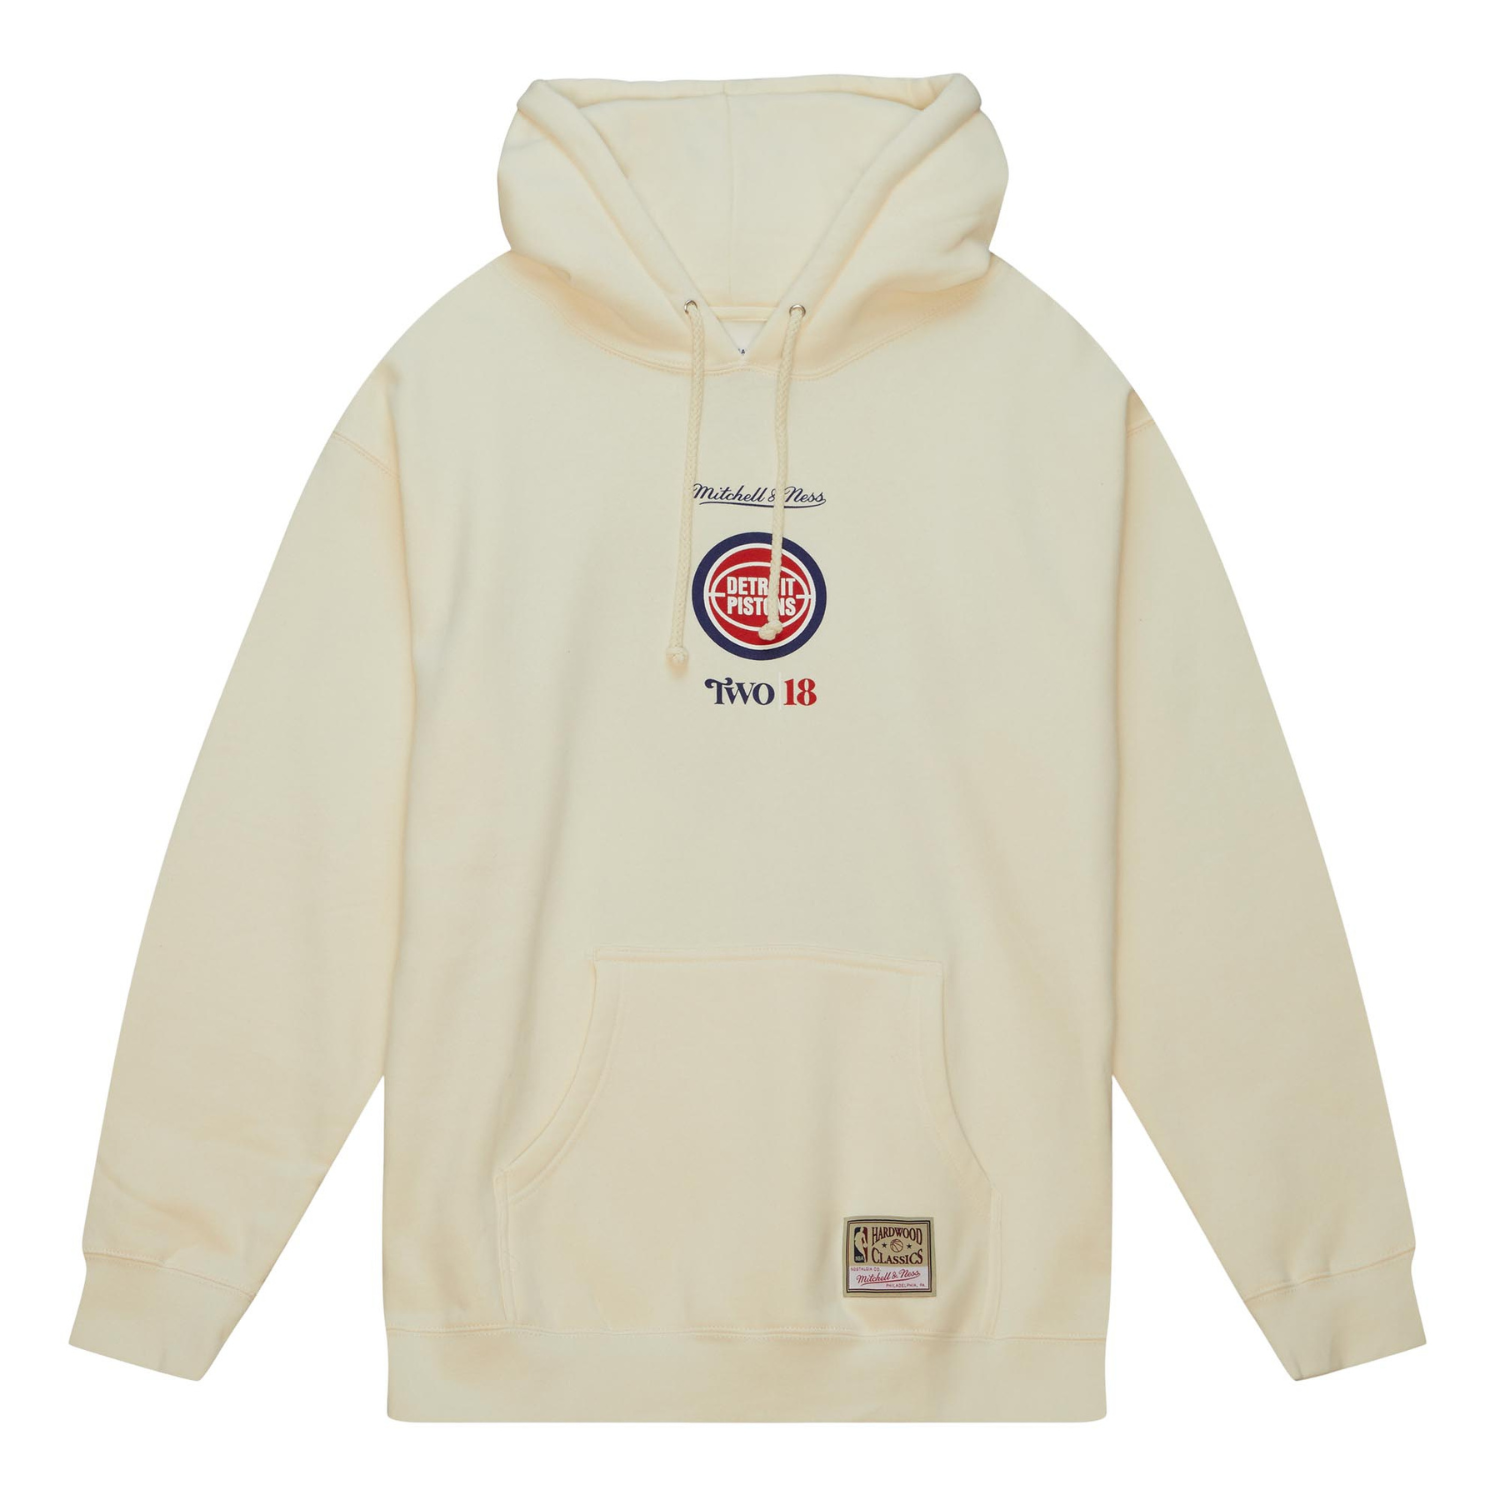 Detroit Pistons Fanatics Branded Power Phase Graphic Hoodie - Mens